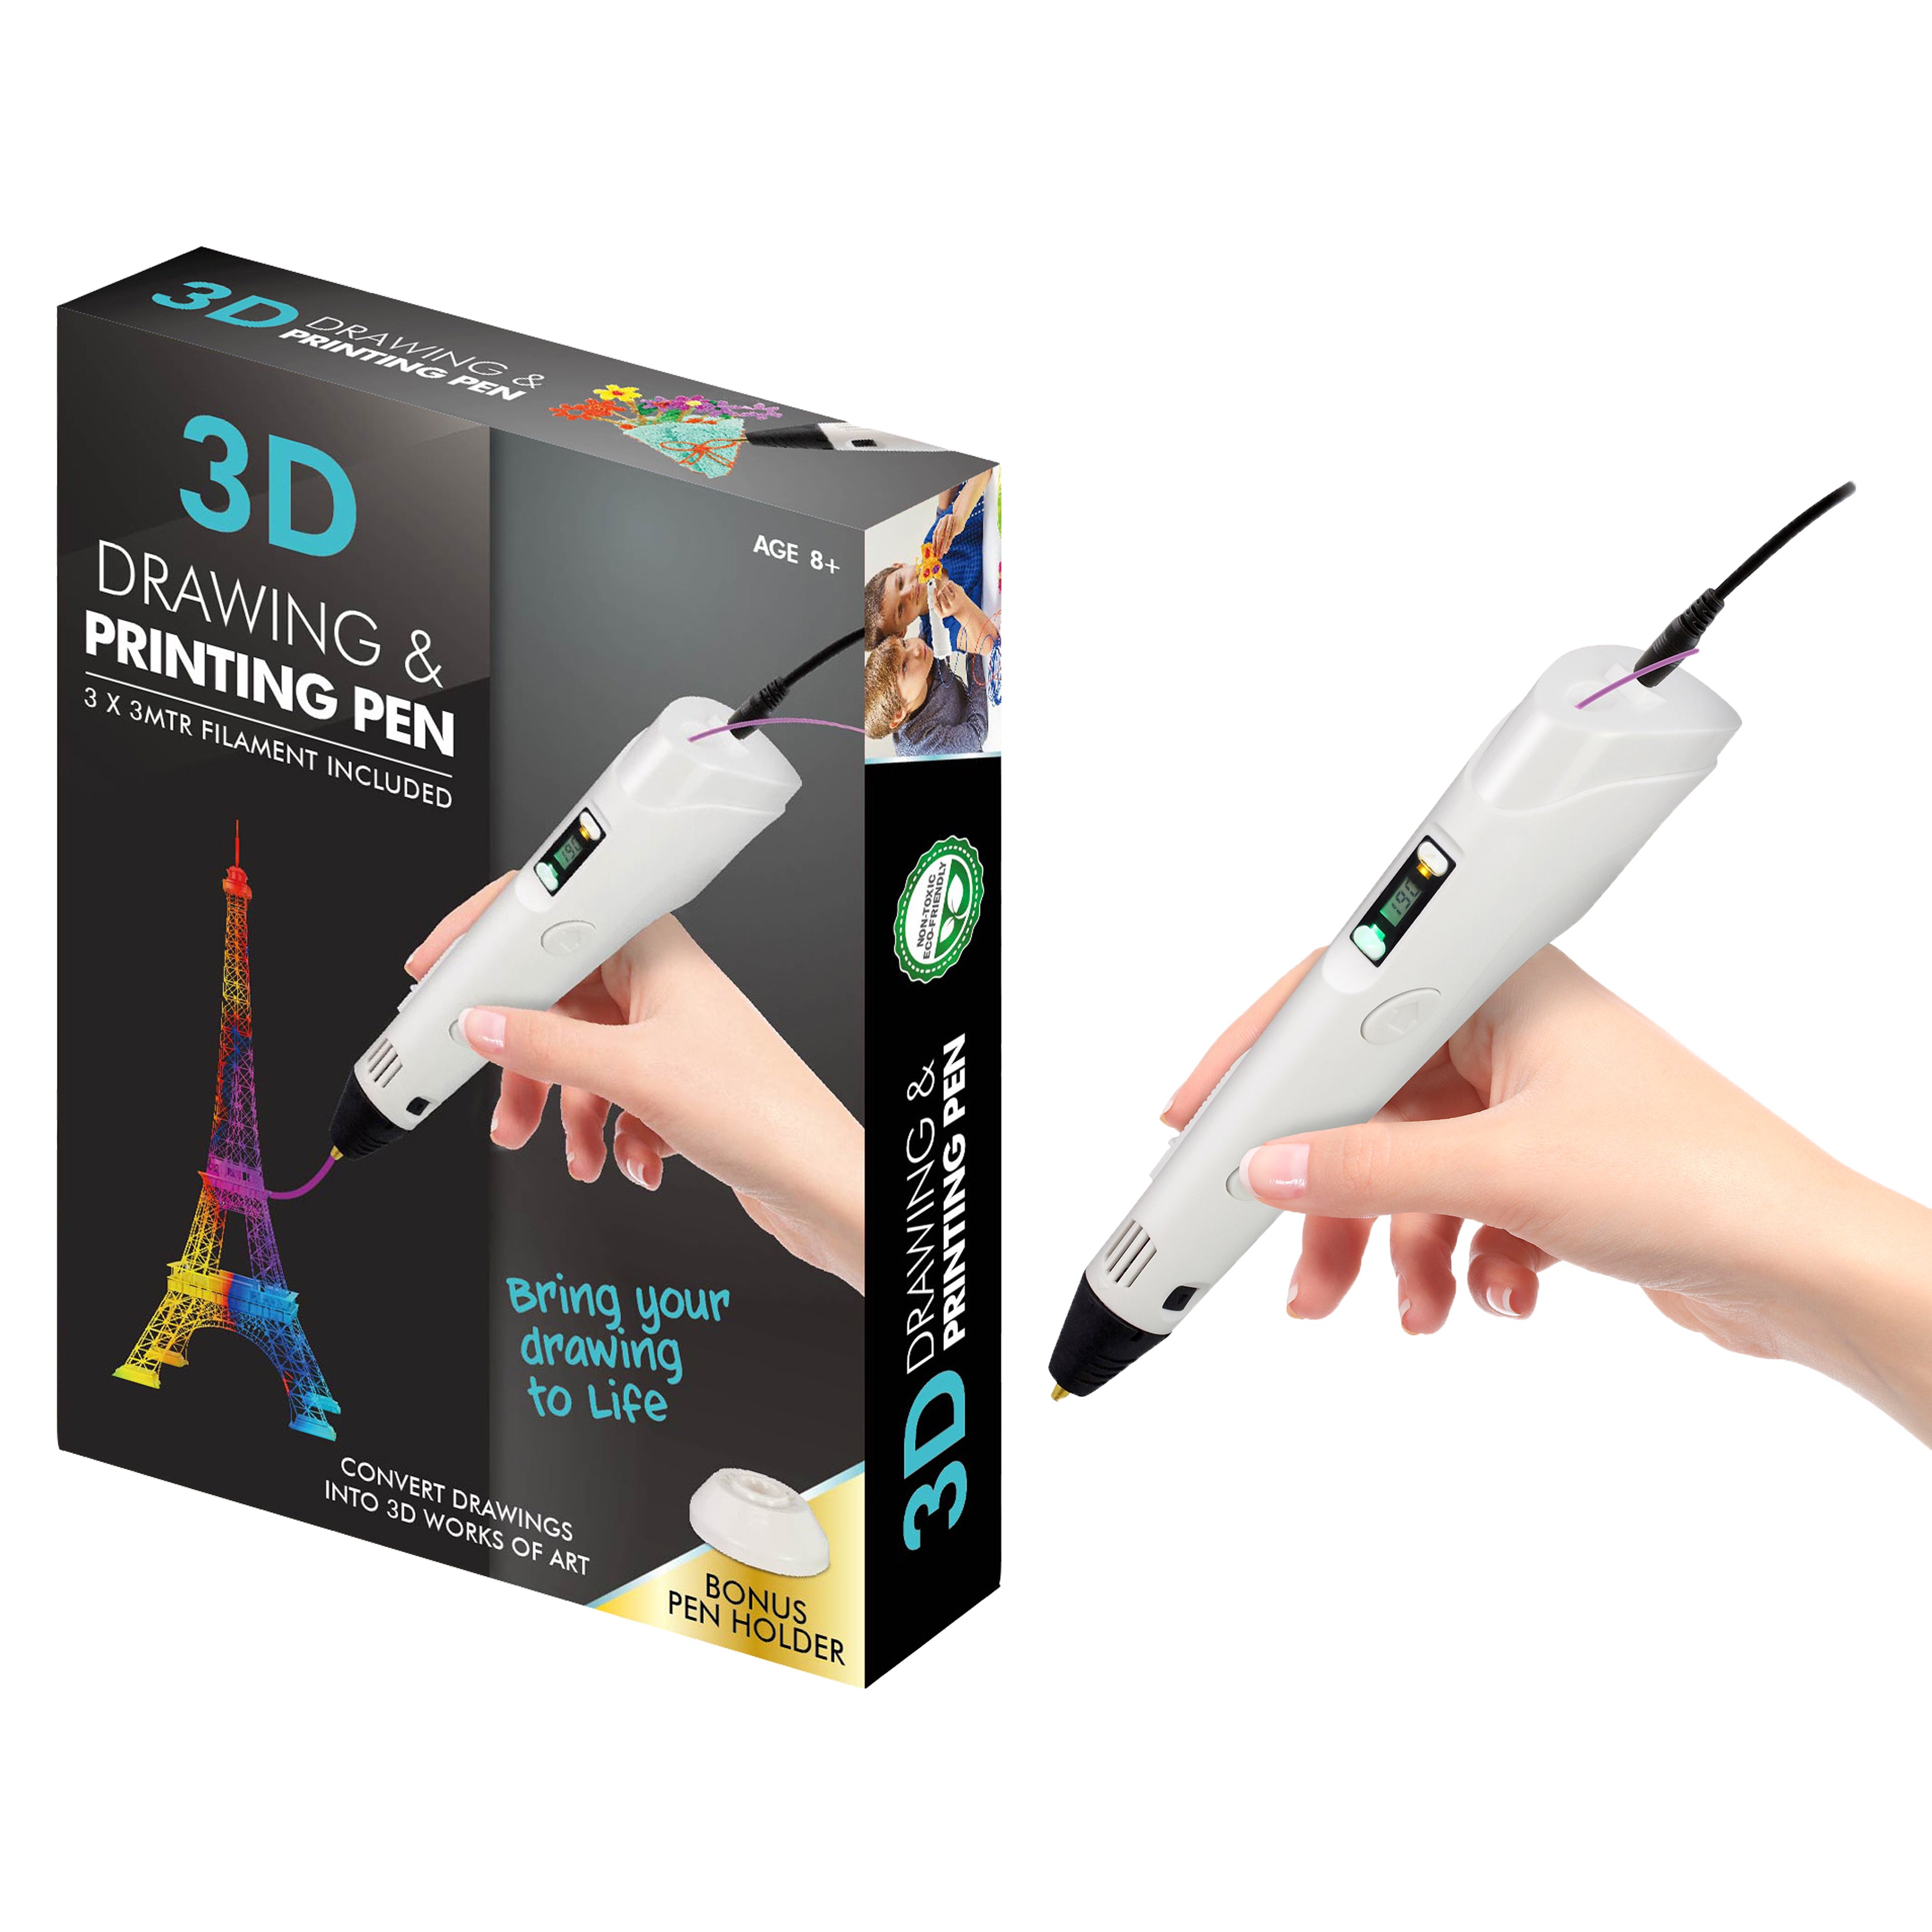 3D Pen with Refills - 4 Pack - Dollars and Sense